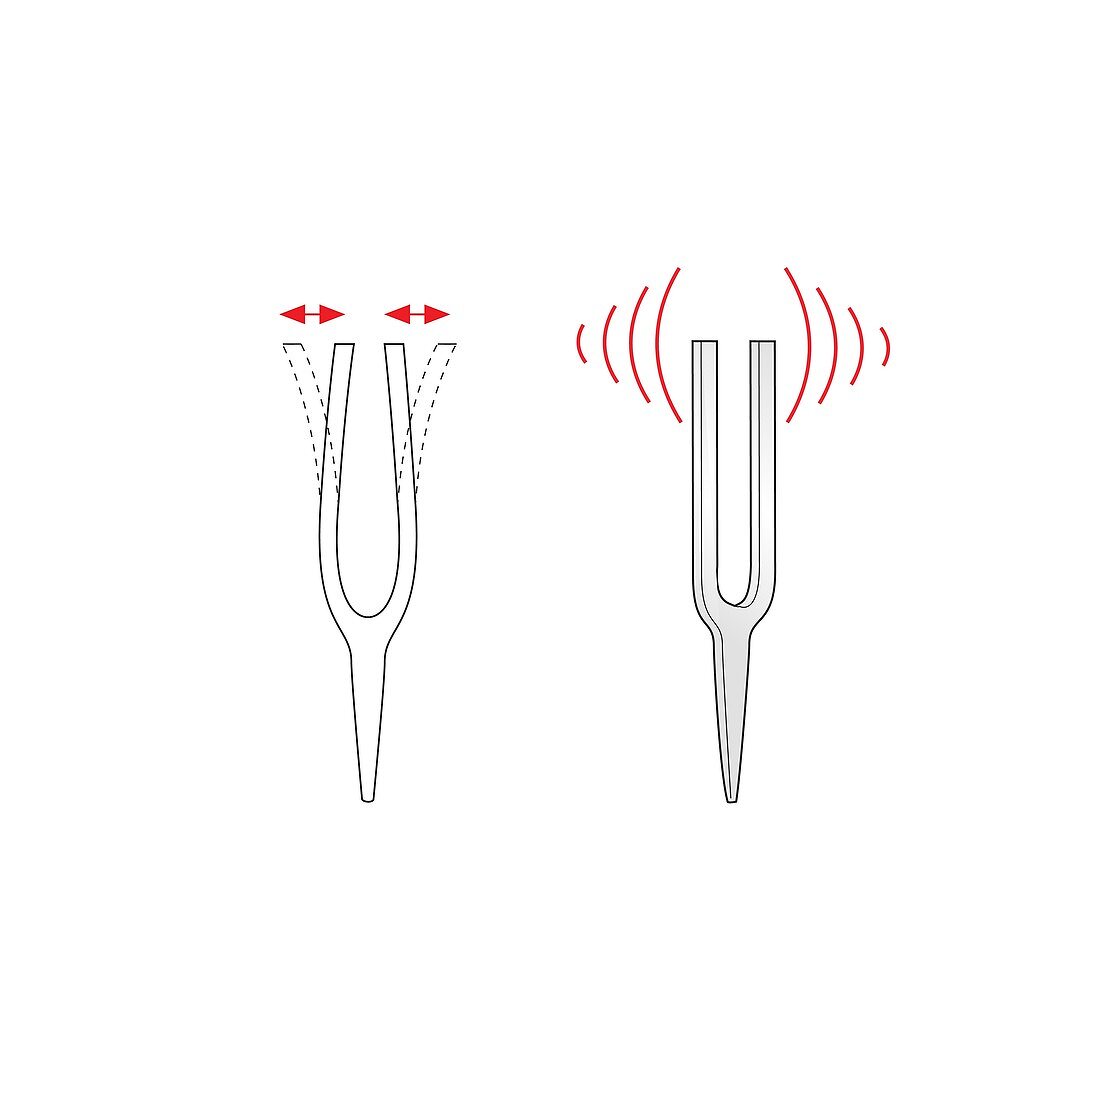 Tuning fork vibrations and sound waves, illustration